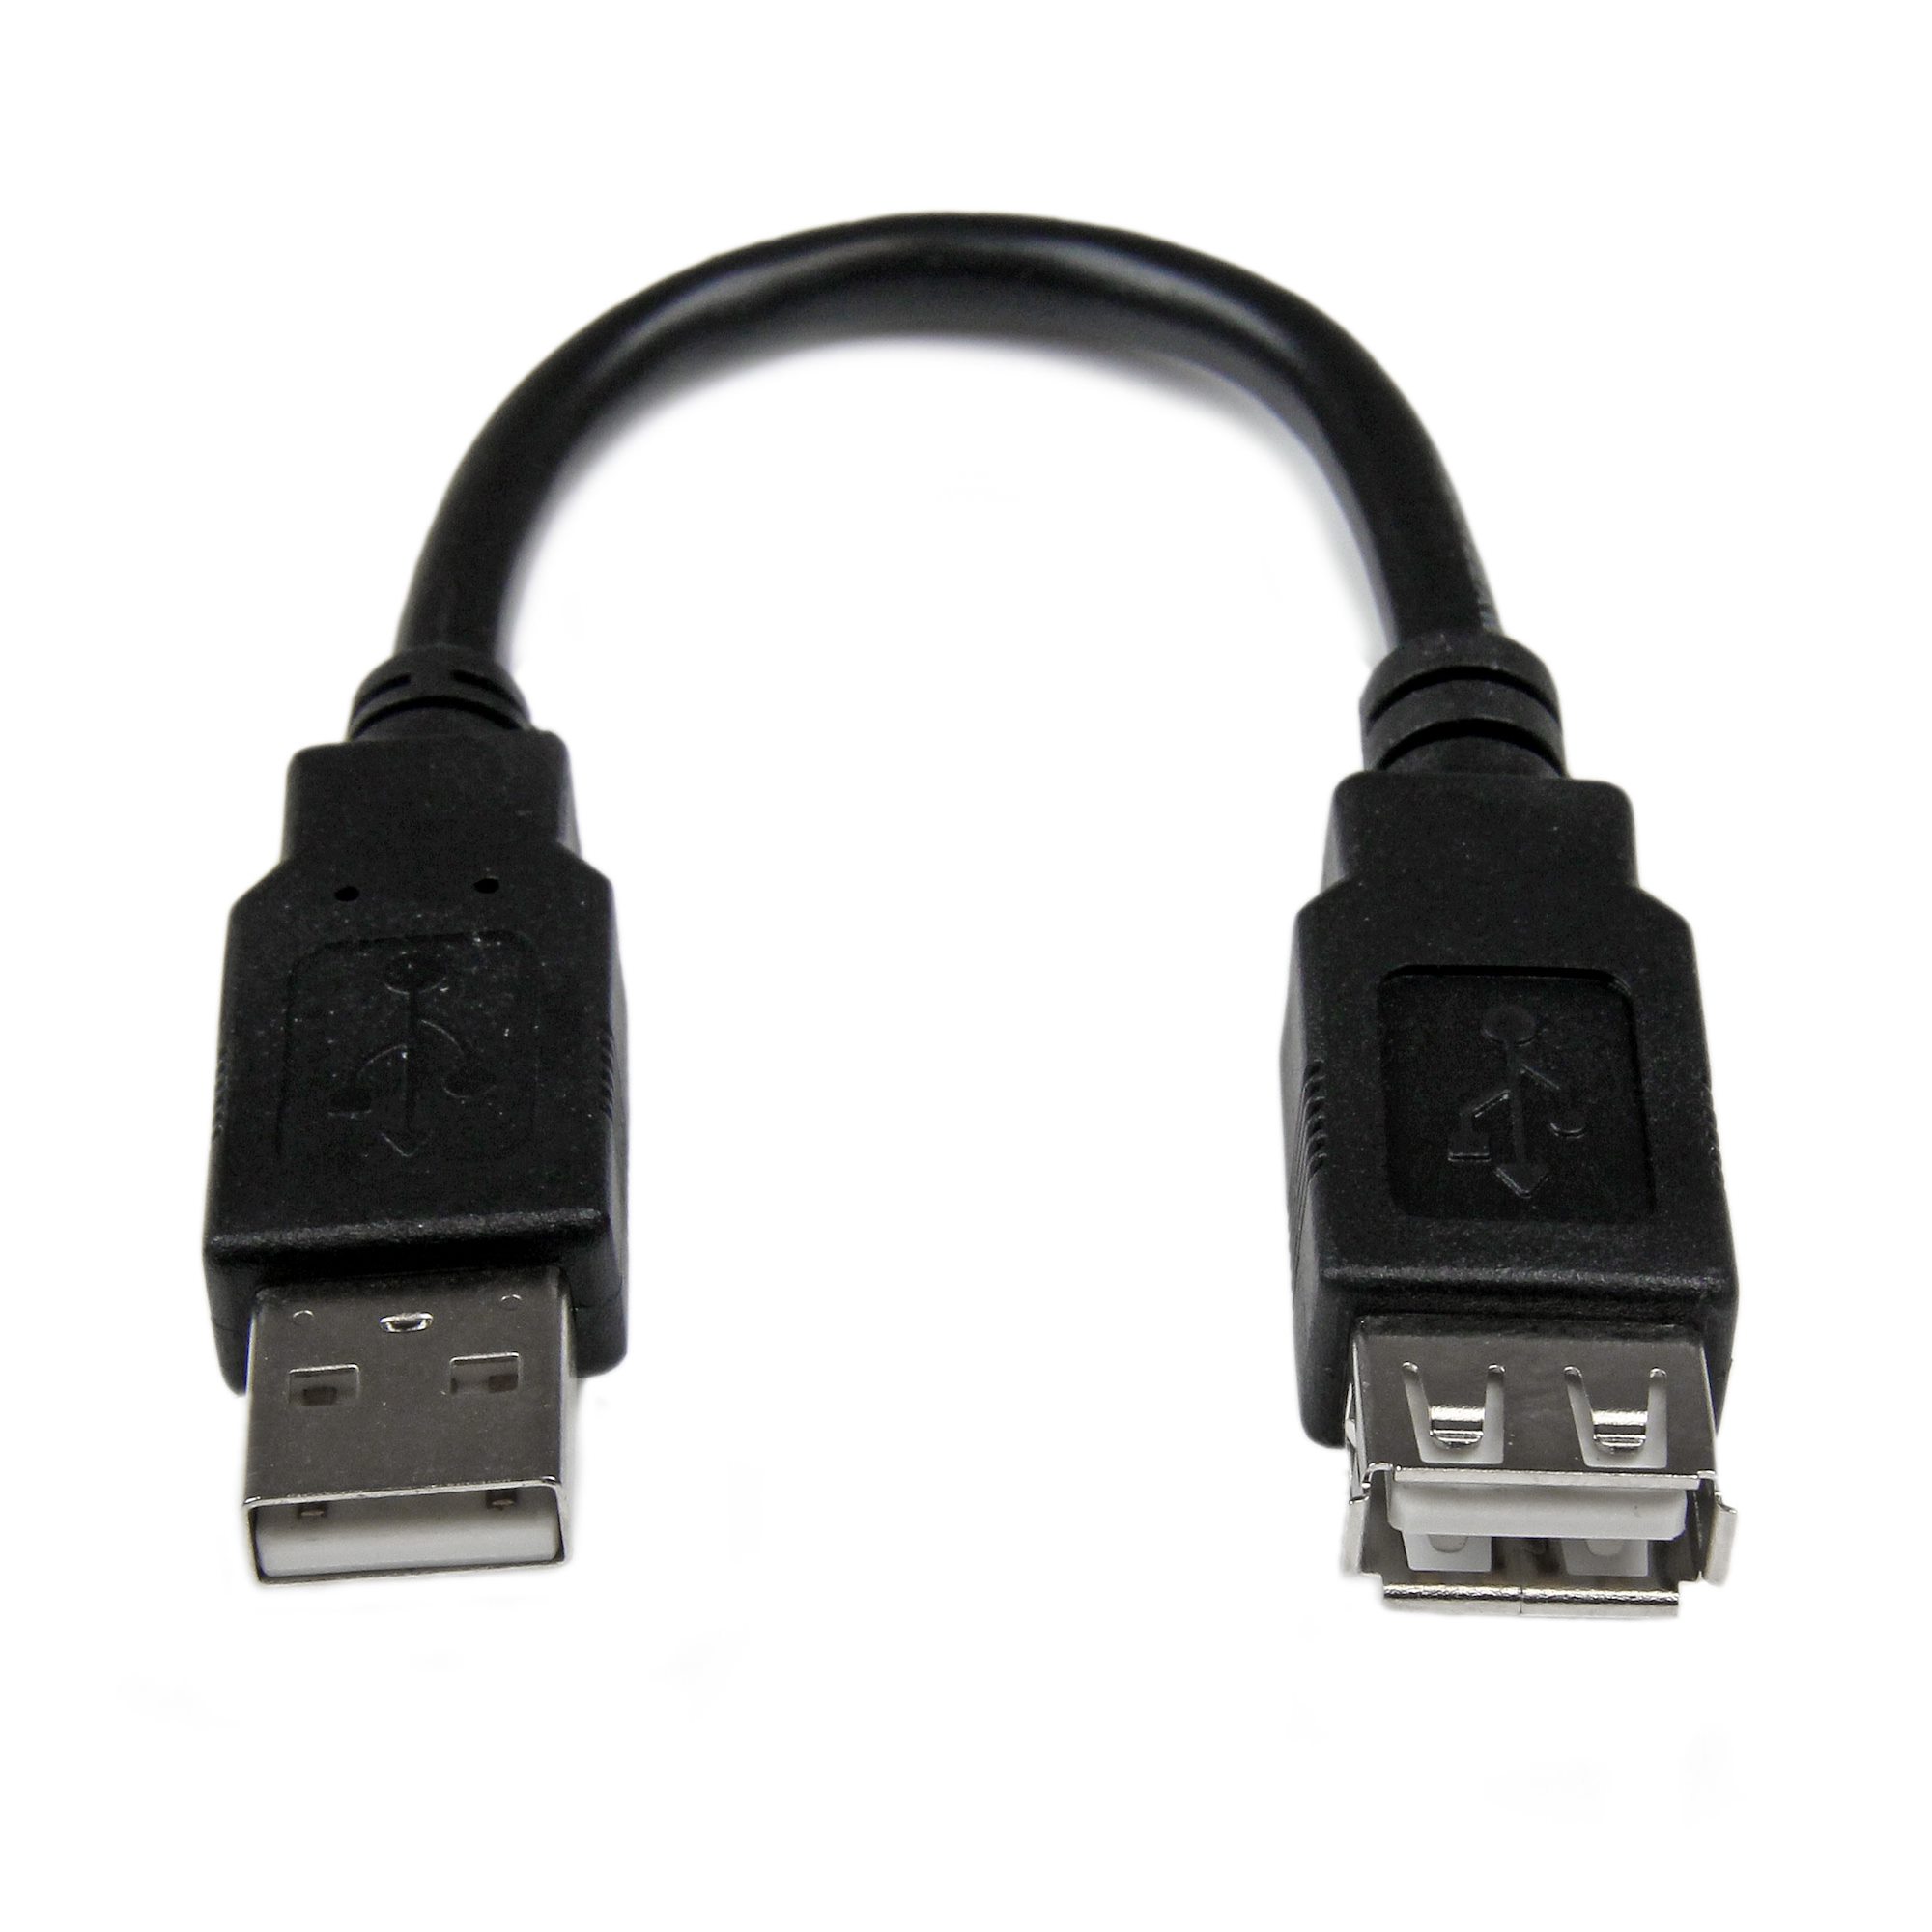 USB 2.0 Male To USB Male Cord Cable Coupler Adapter Convertor Connector Changer 